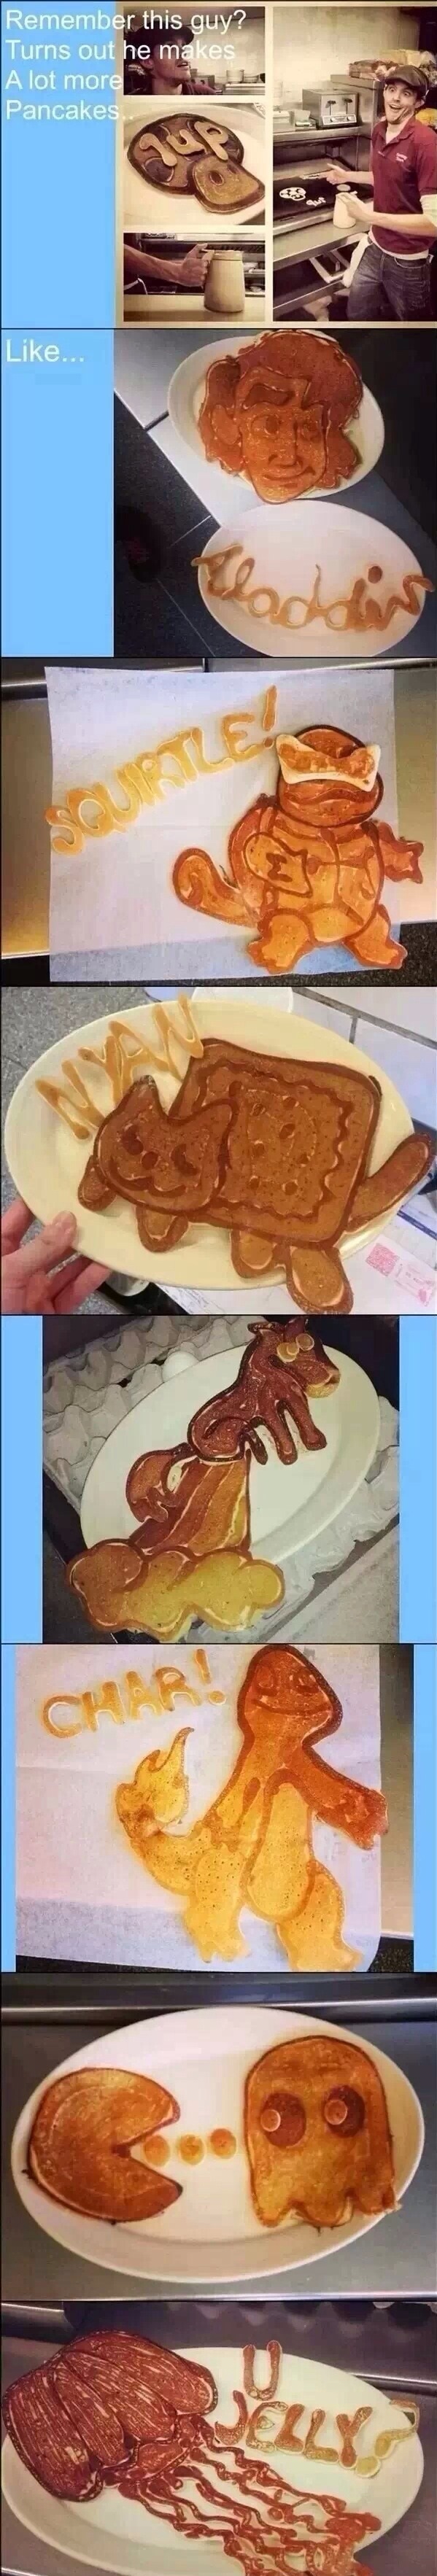 funny-picture-great-pancakes